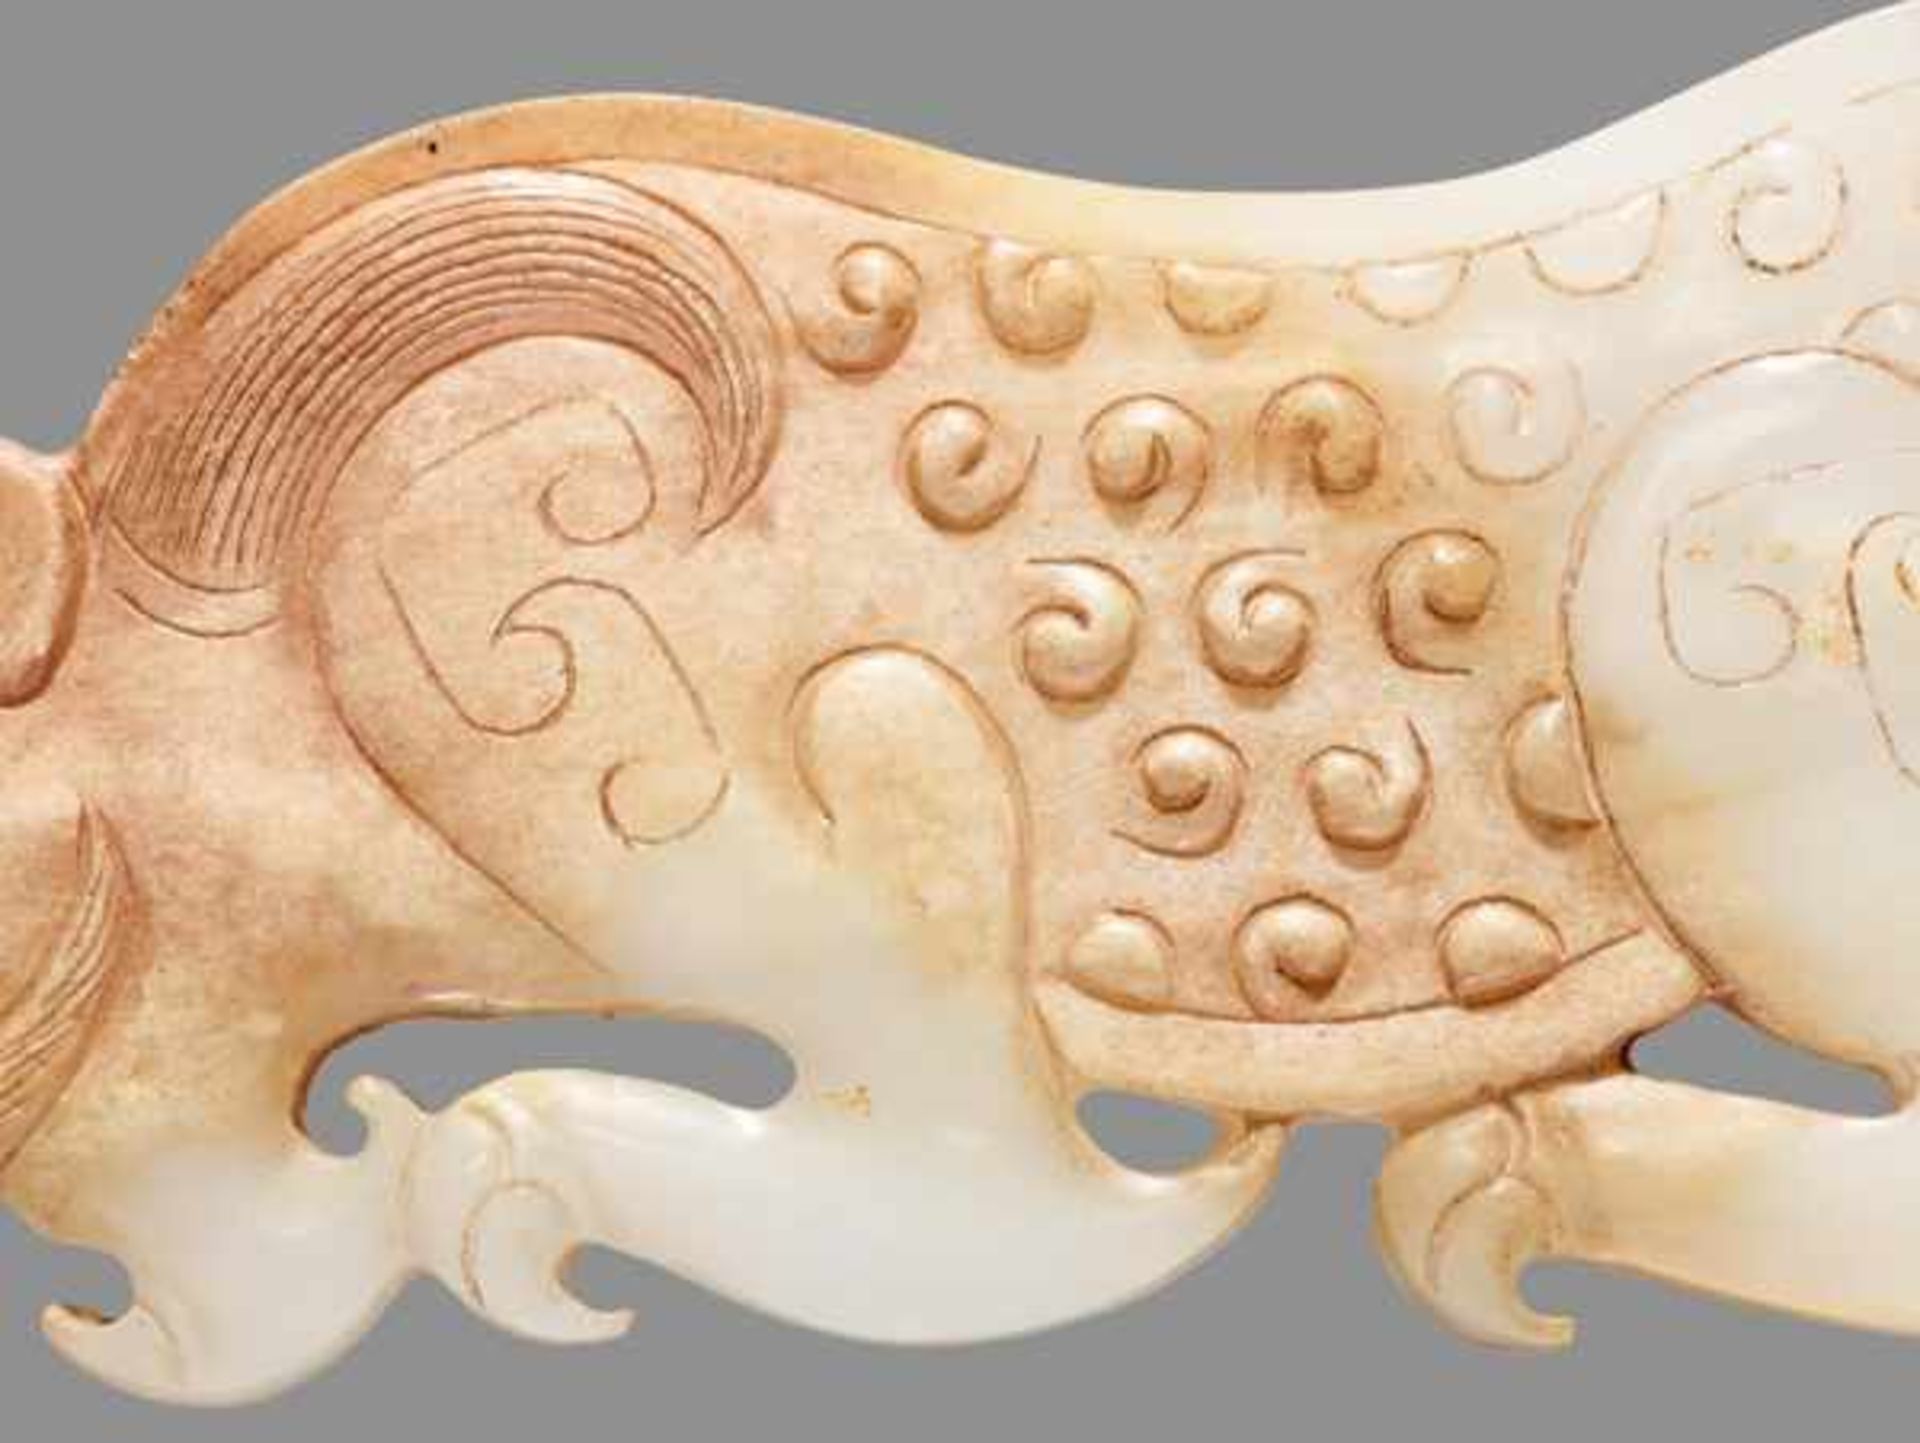 AN AMAZING CROUCHING TIGER IN WHITE JADE Jade, China. Western Han, 3rd - 2nd century BC 虎形玉飾 - 西漢, - Image 4 of 8